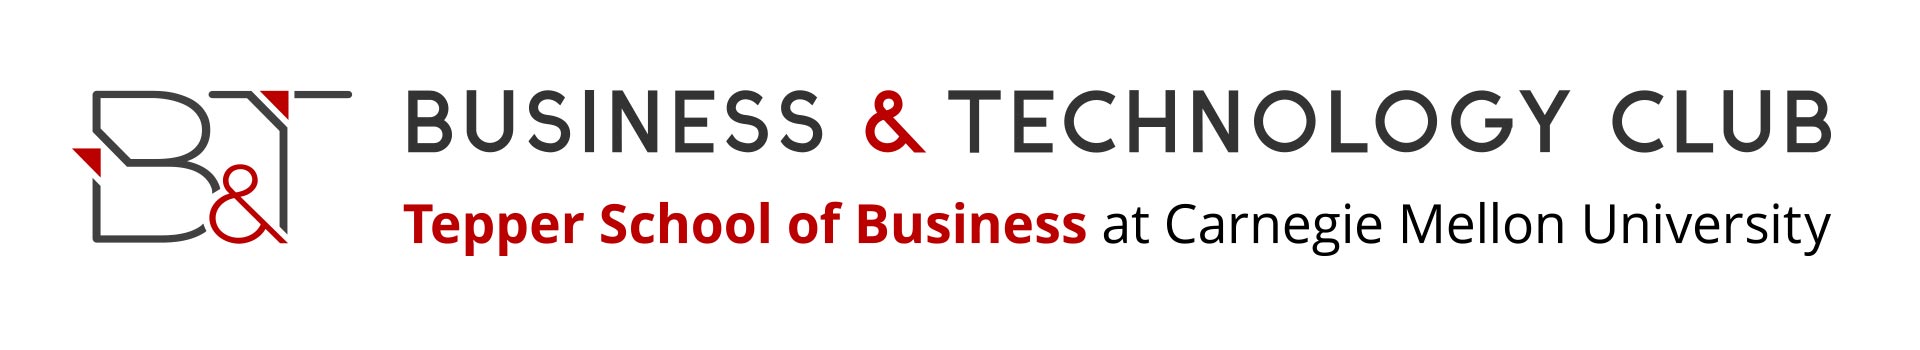 Business and Technology Club